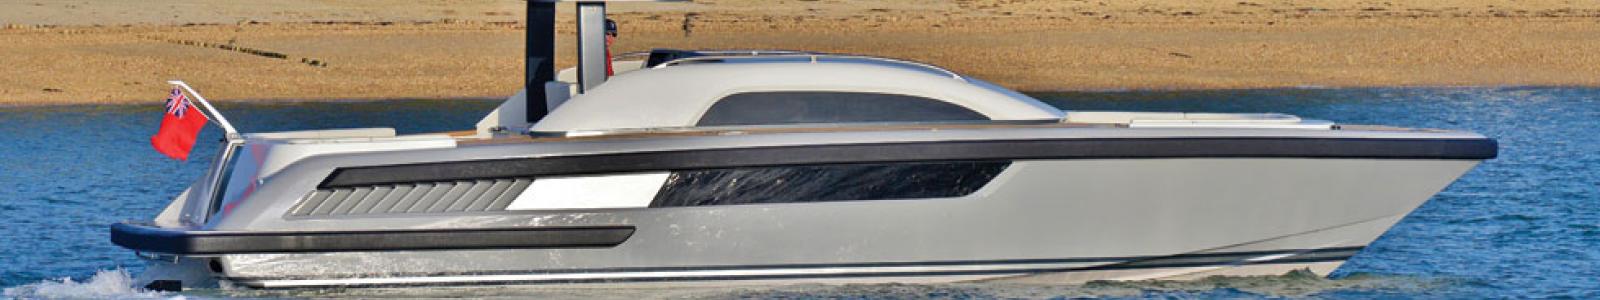  Projects-2015-03-Compass-close-limousine-tender-fenders.jpg 